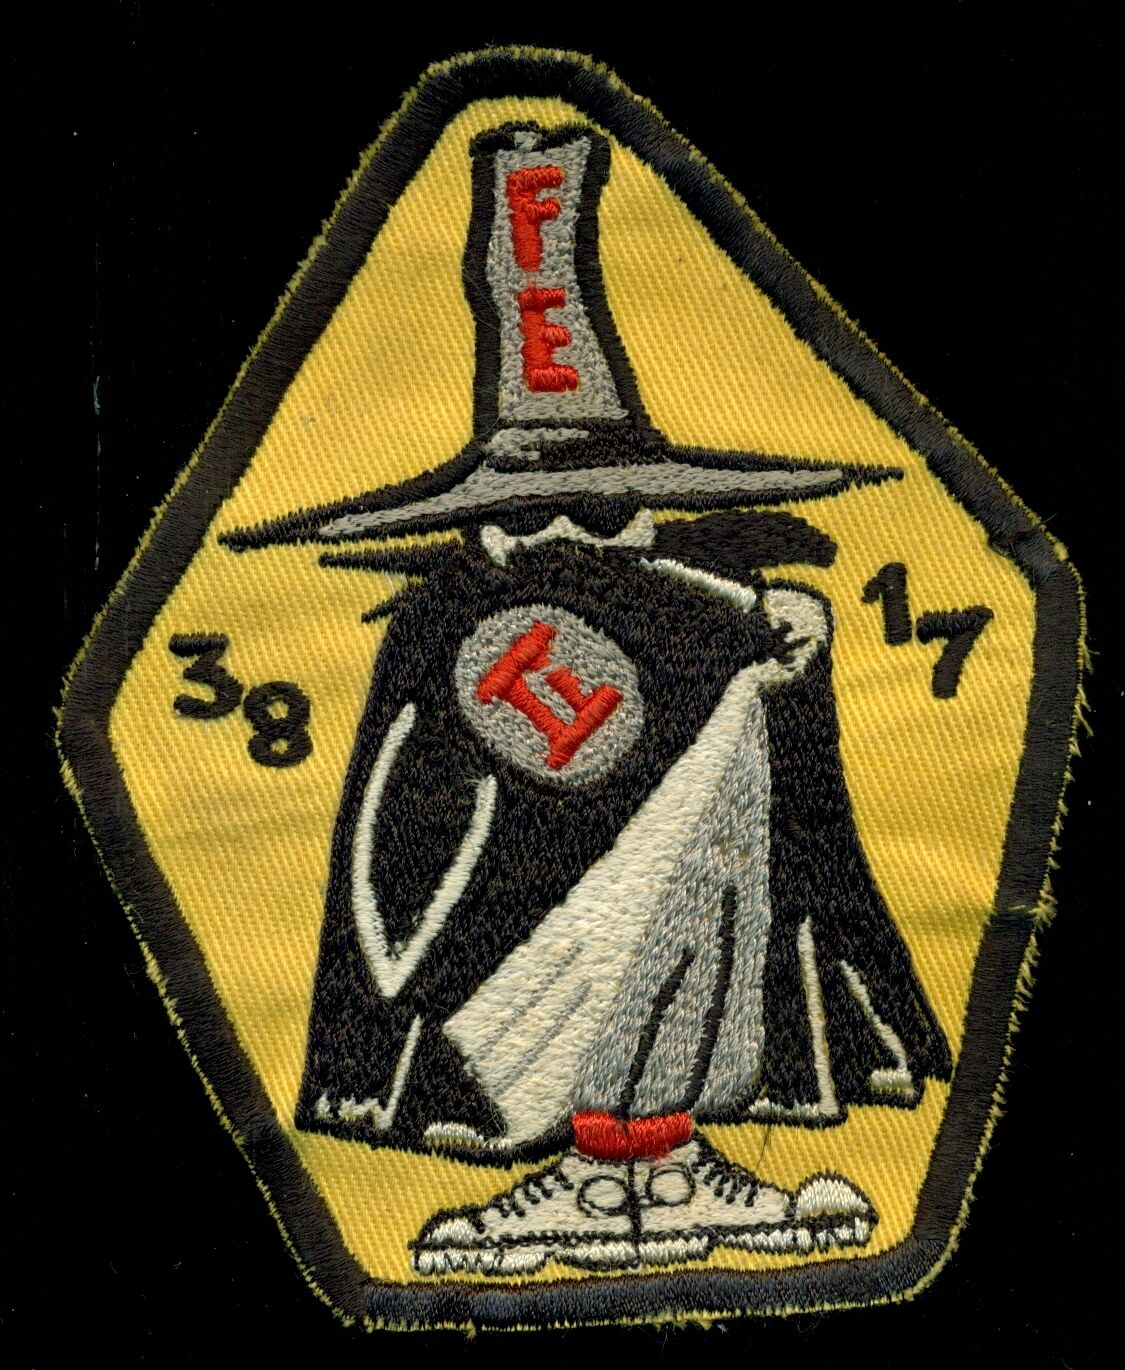  USAF 26th Tactical Reconnaissance Wing Zweibrucken AB Patch S-20